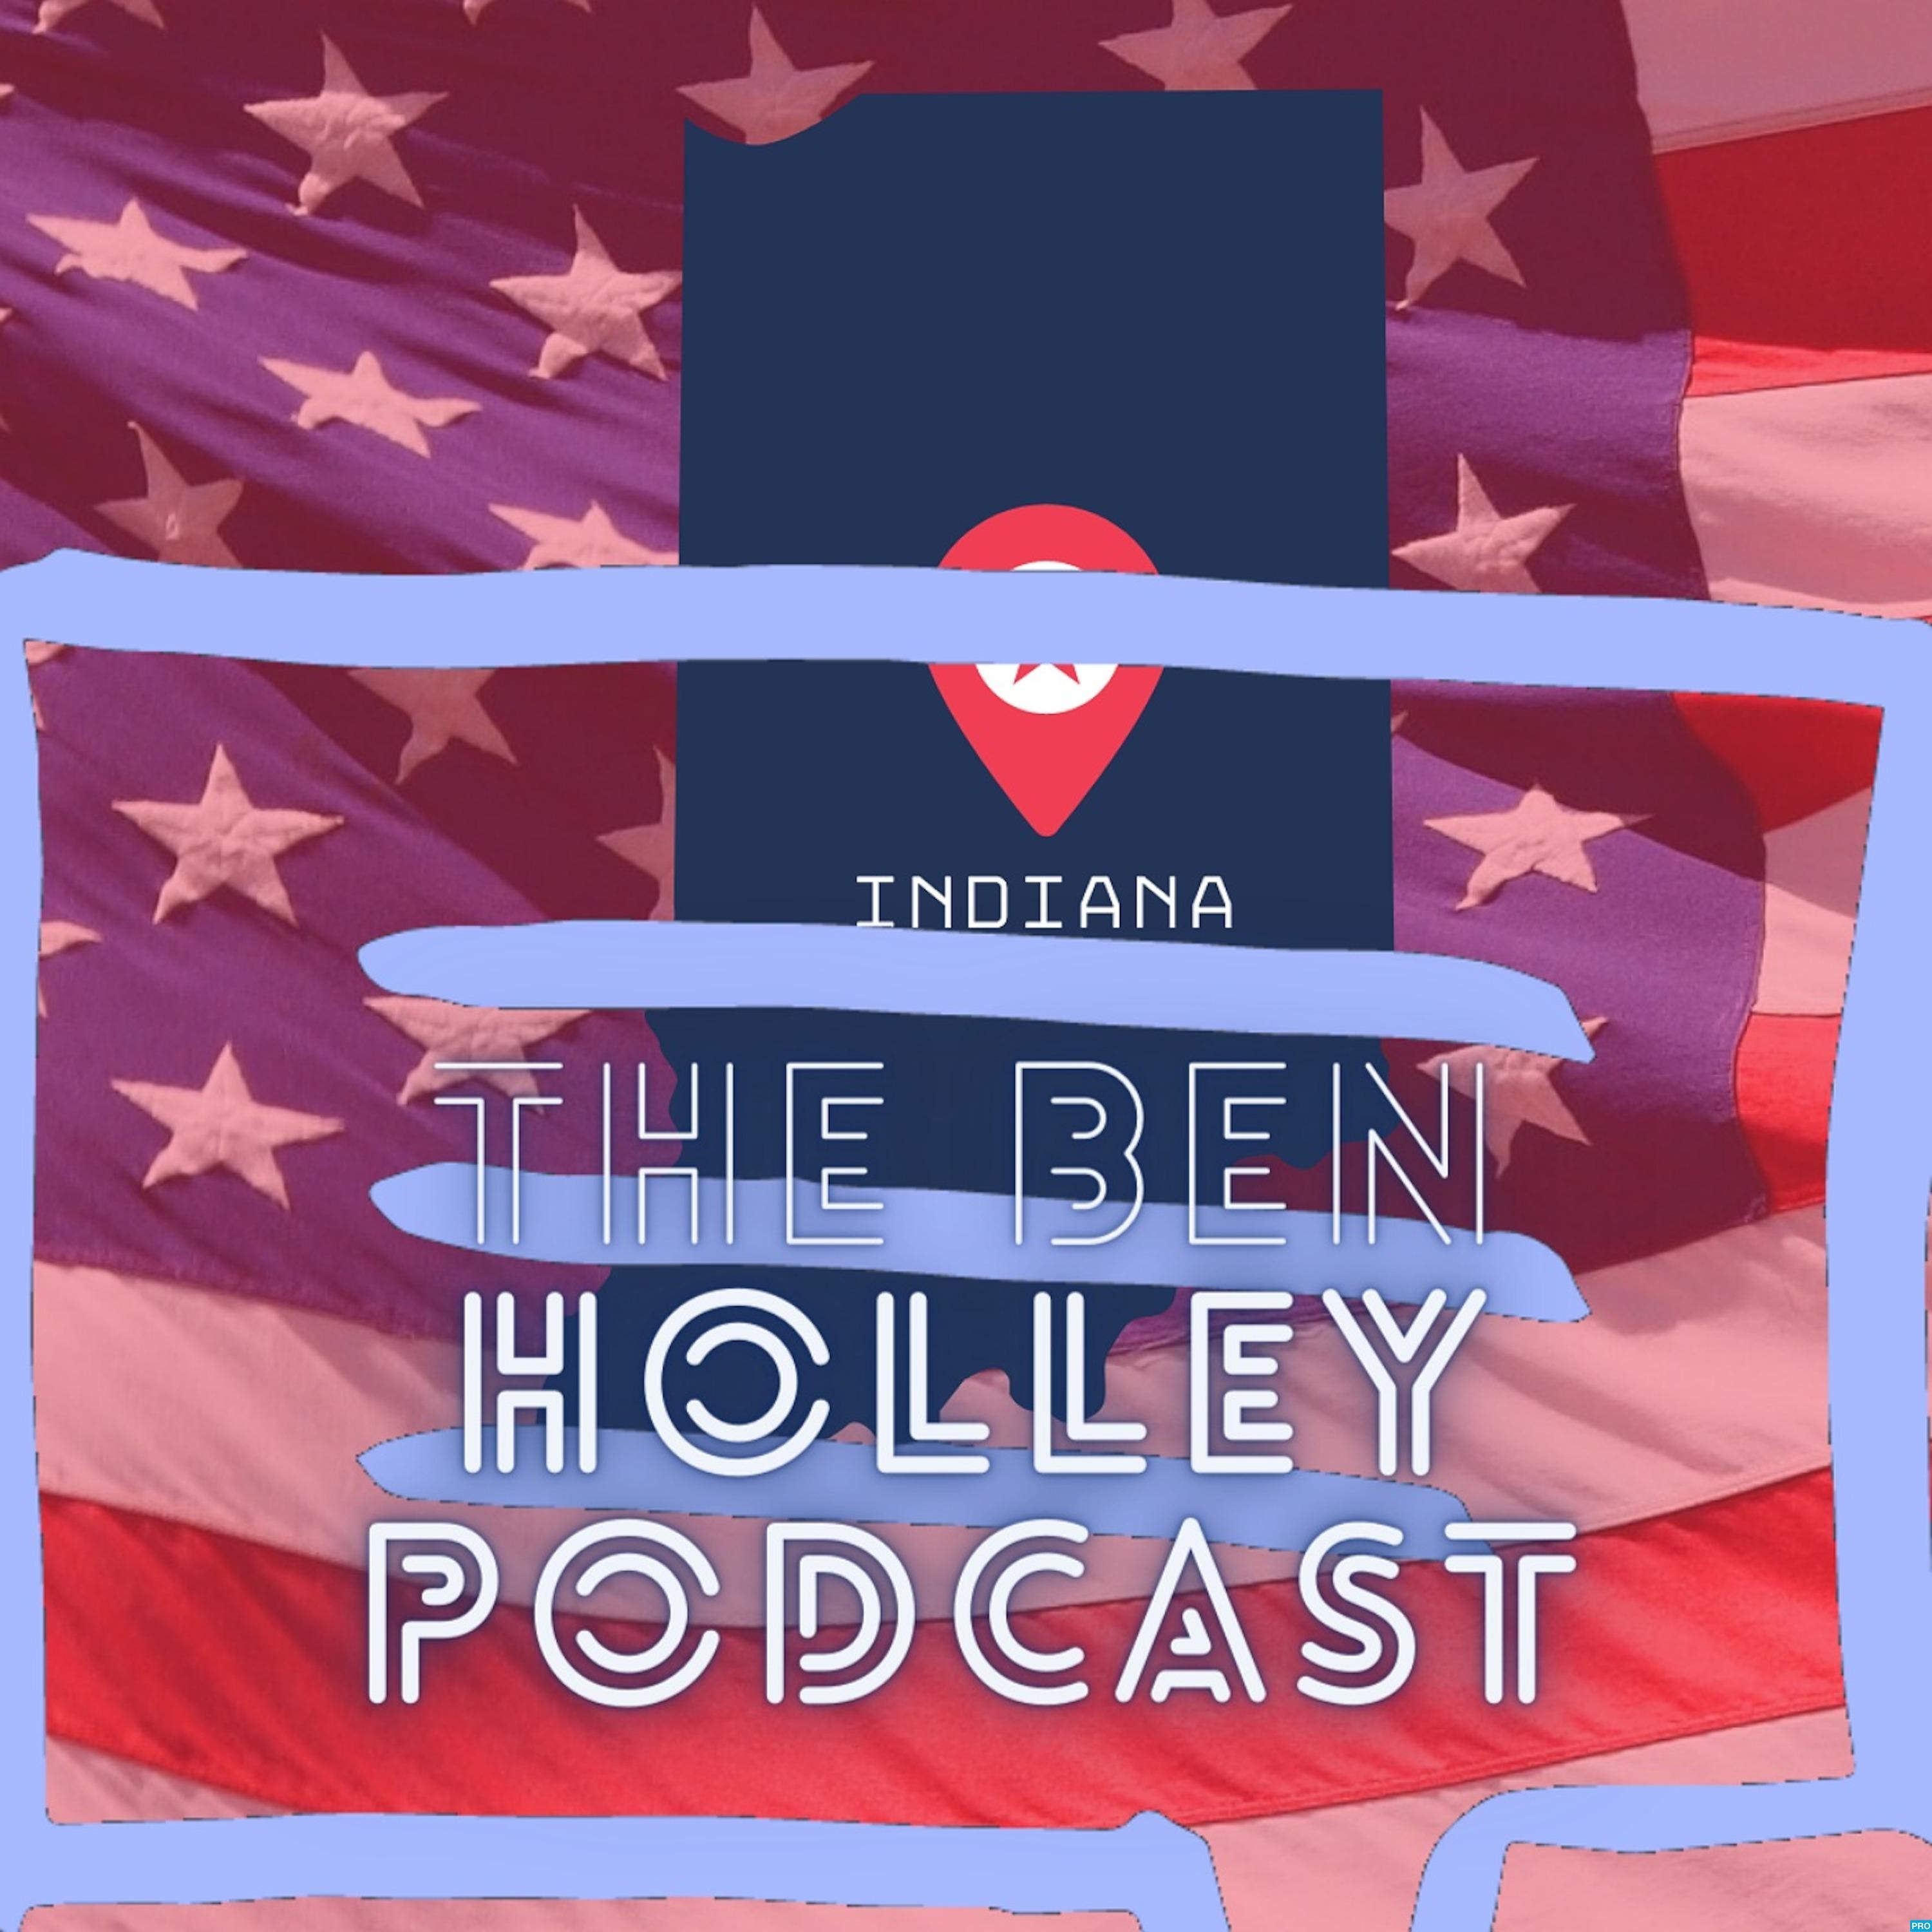 The Ben Holley Podcast